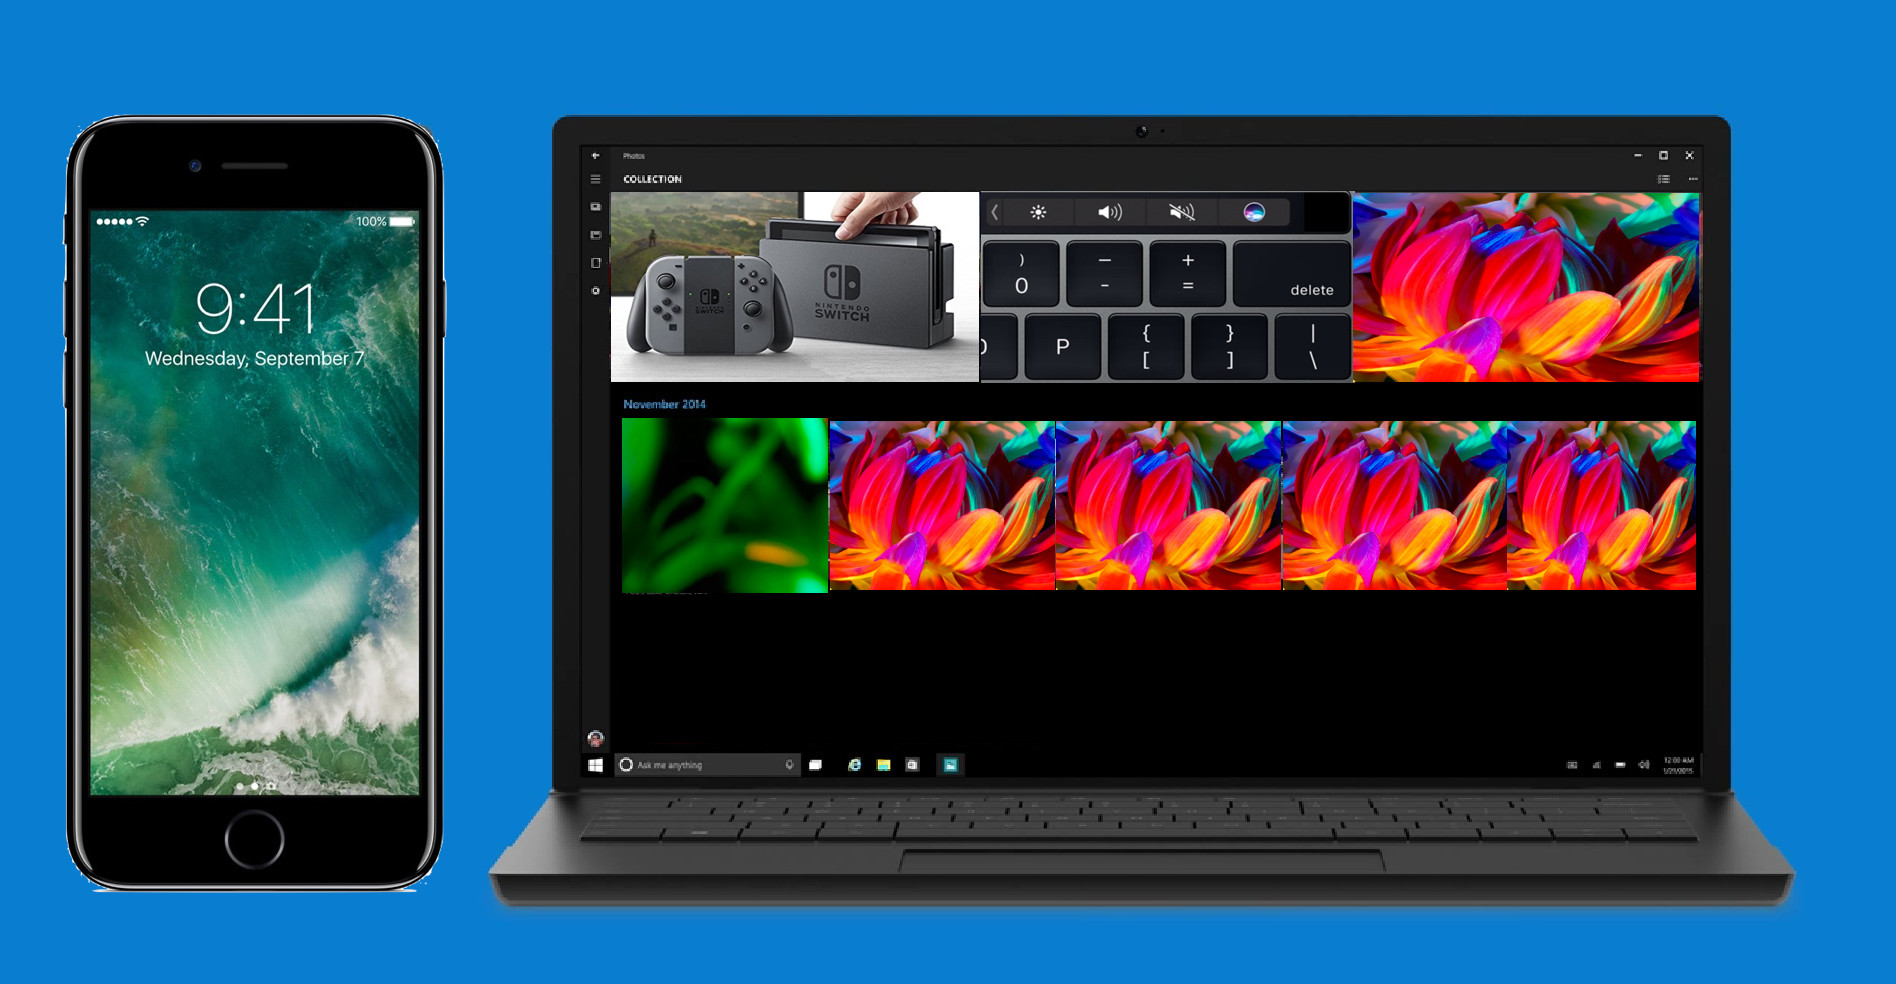 How to Transfer Photos from iPhone to Windows 10 PC